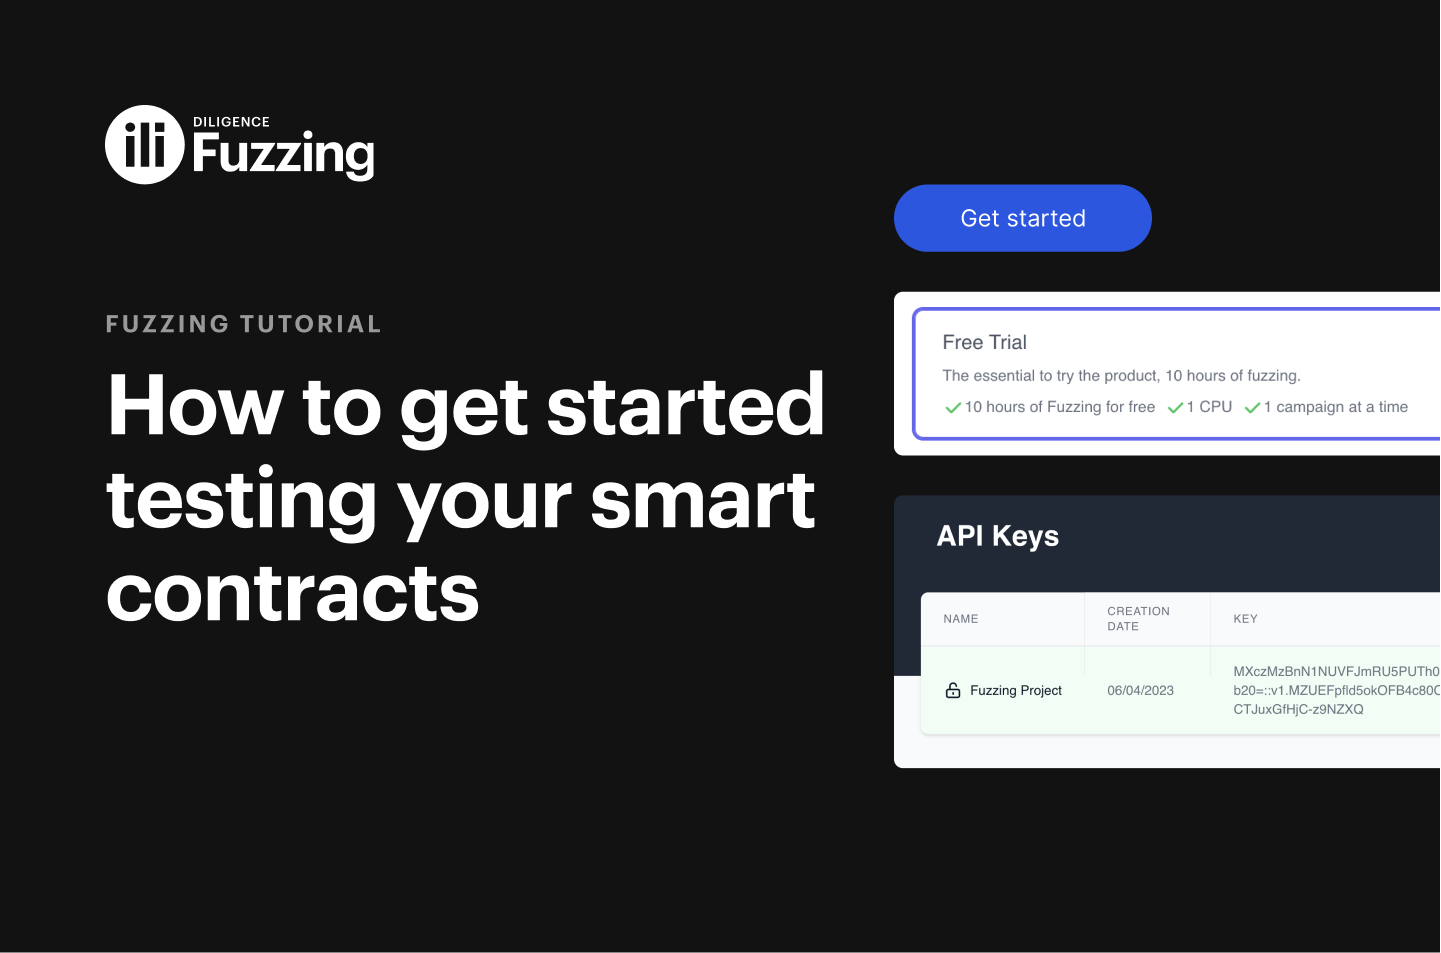 Fuzzing Tutorial: How to get started testing your smart contracts